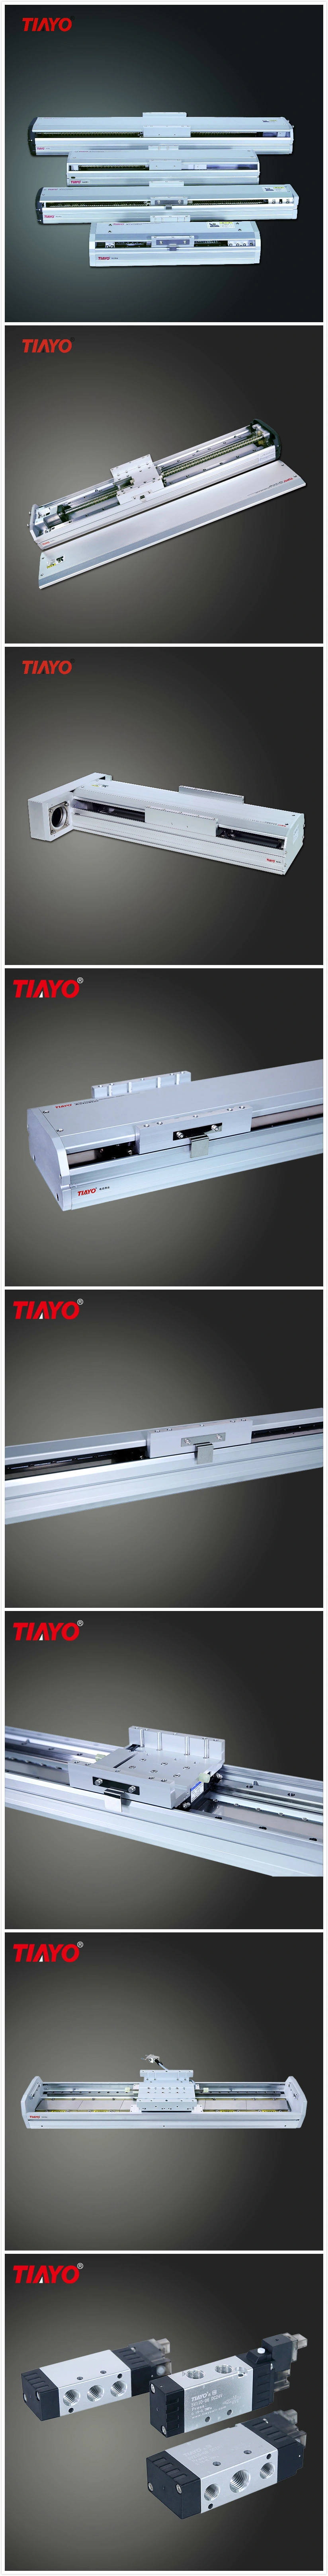 Tiayo Ball Screw Module Actuators Linear Motion System for Automation Machines